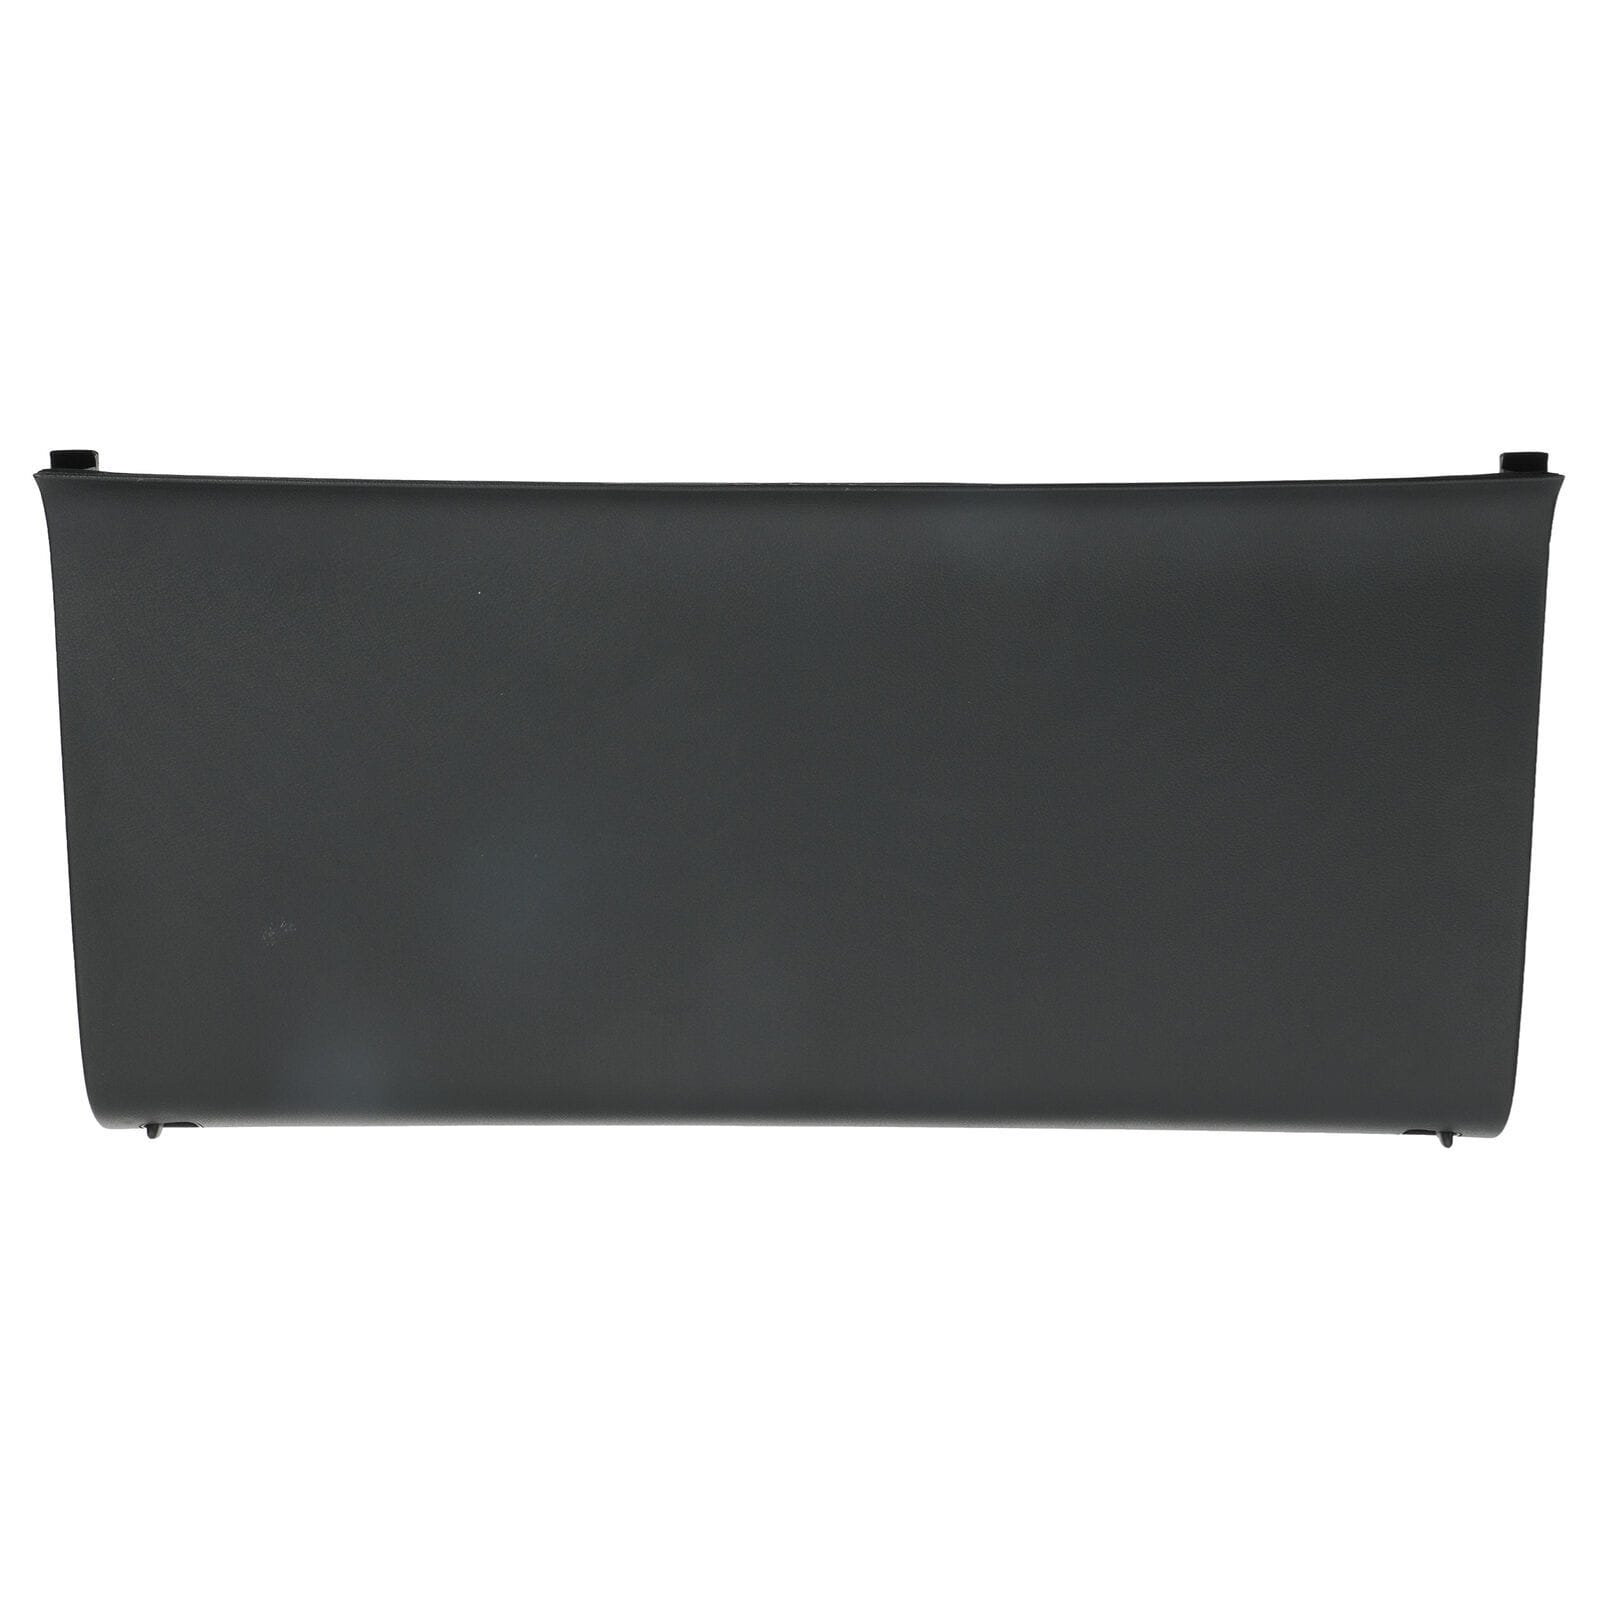 Interior/Upholstery - Want black tunnel trunk divider - New or Used - 1994 Mazda RX-7 - Charleston, SC 29492, United States